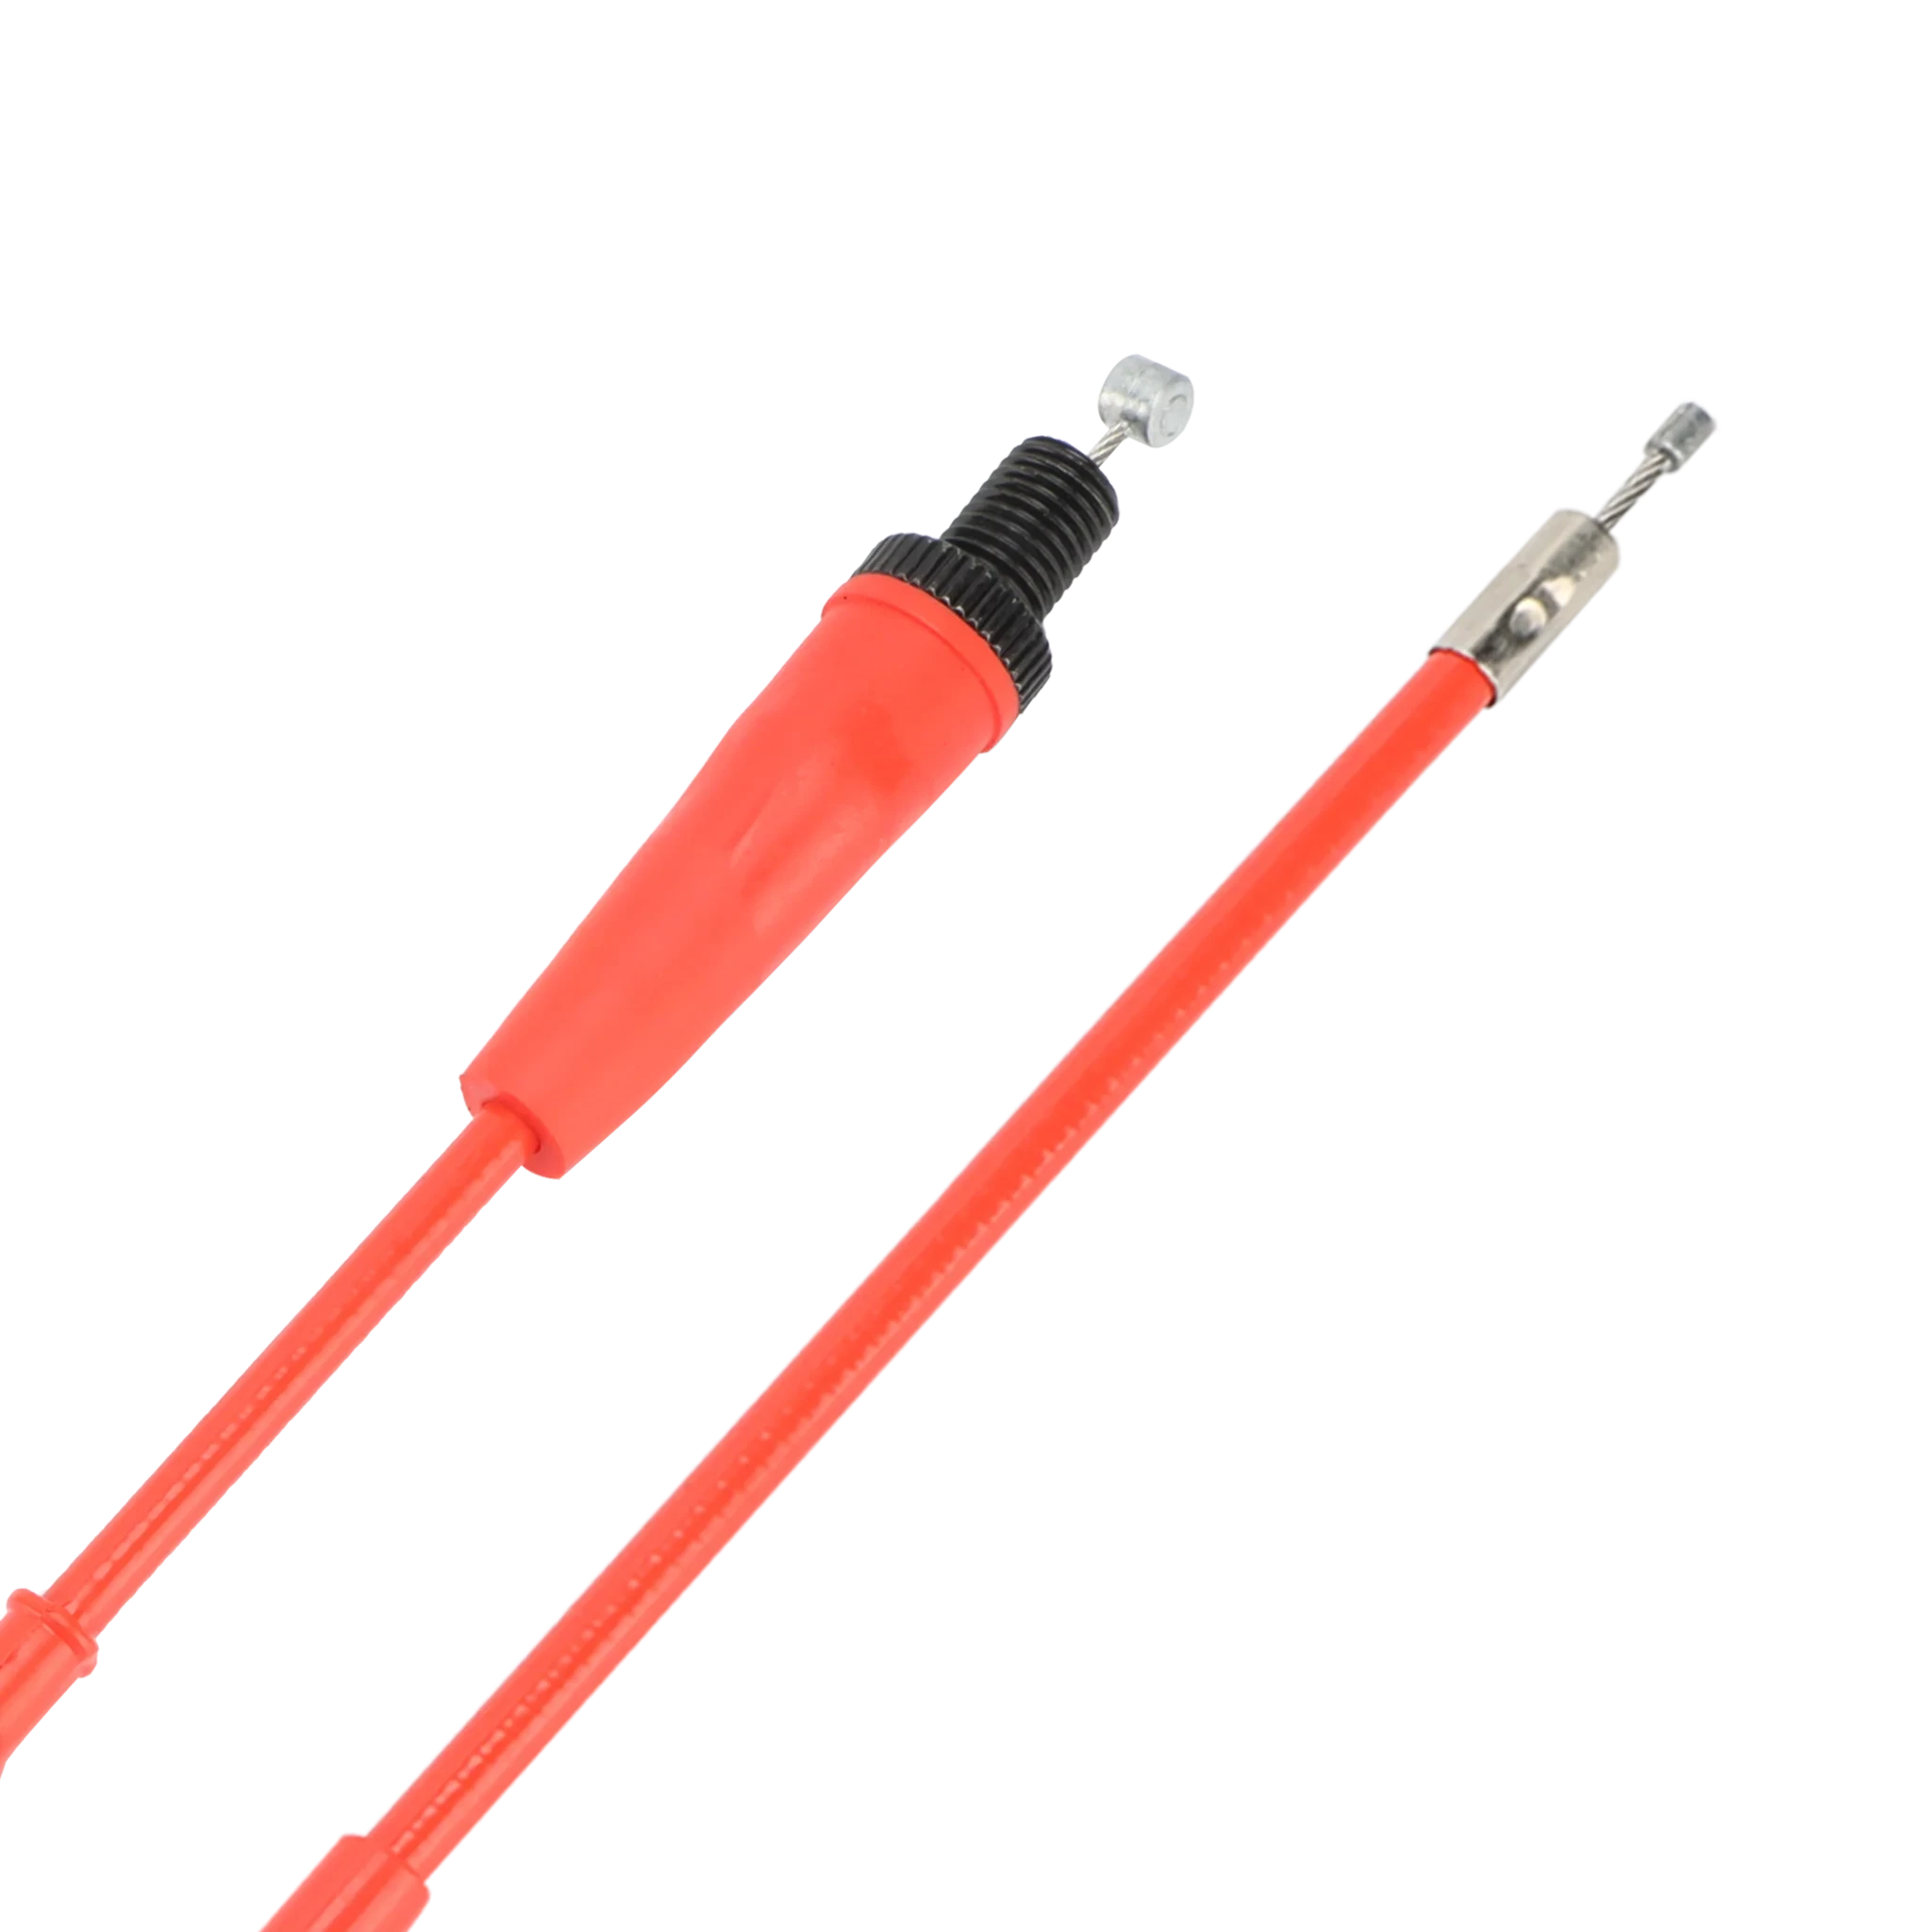 NB Throttle Cable-Red 40.3"/5.7"